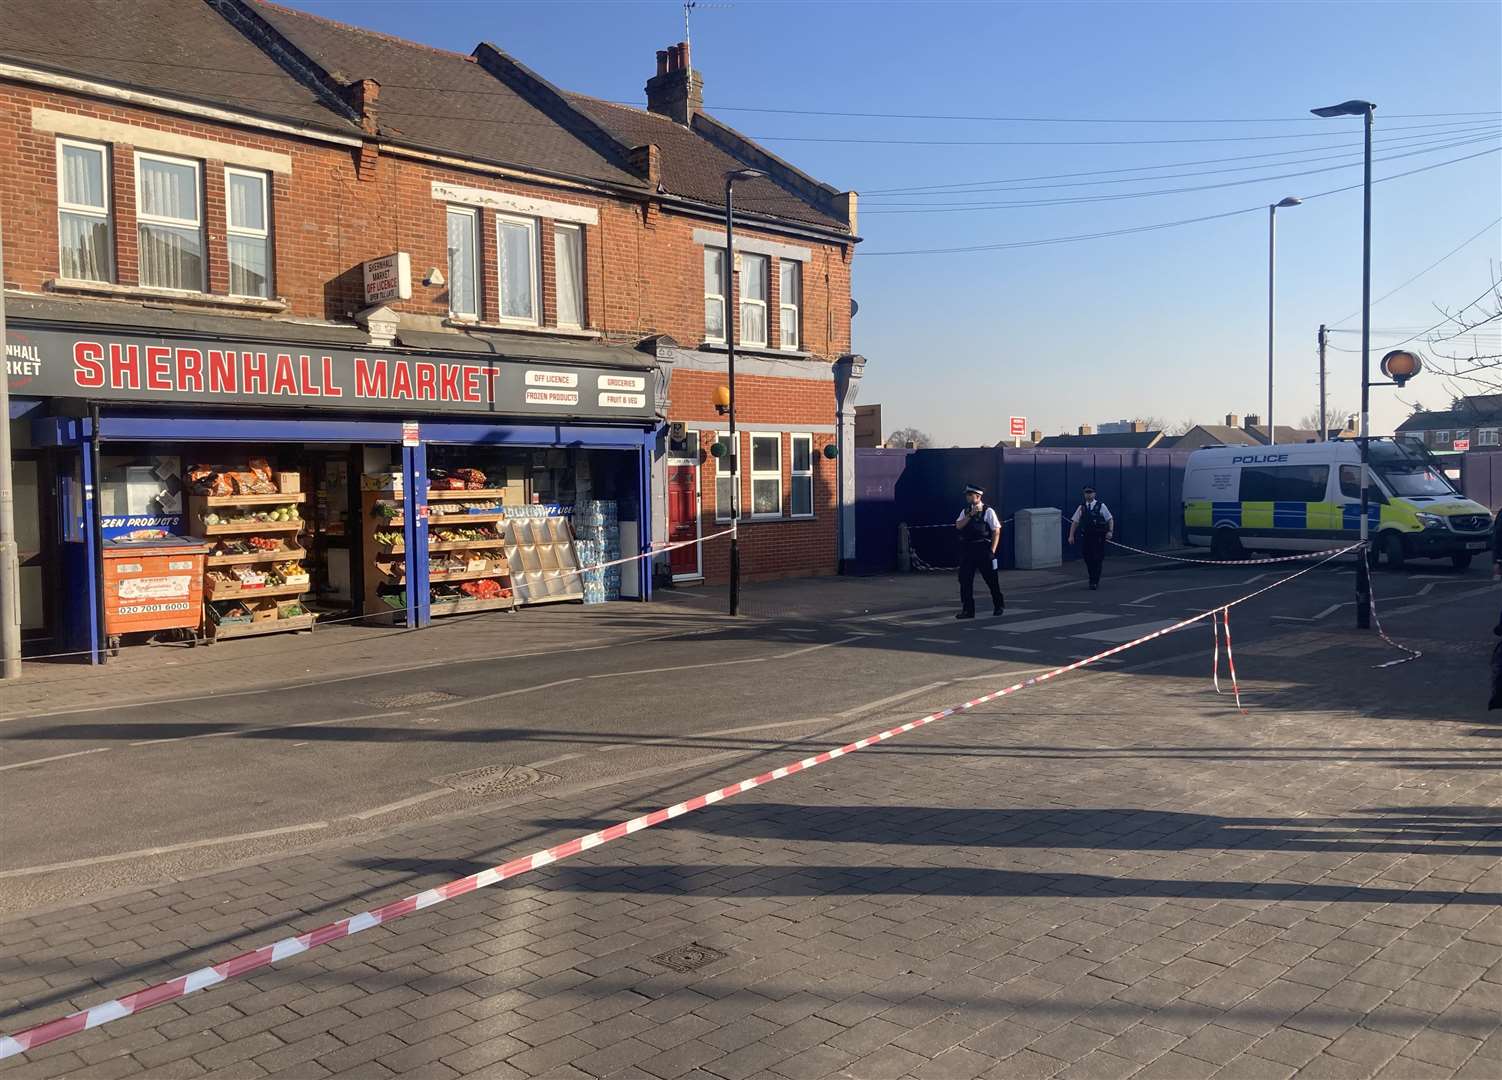 A police cordon in Shernhall street in Walthamstow (Timothy Sigsworth/PA)